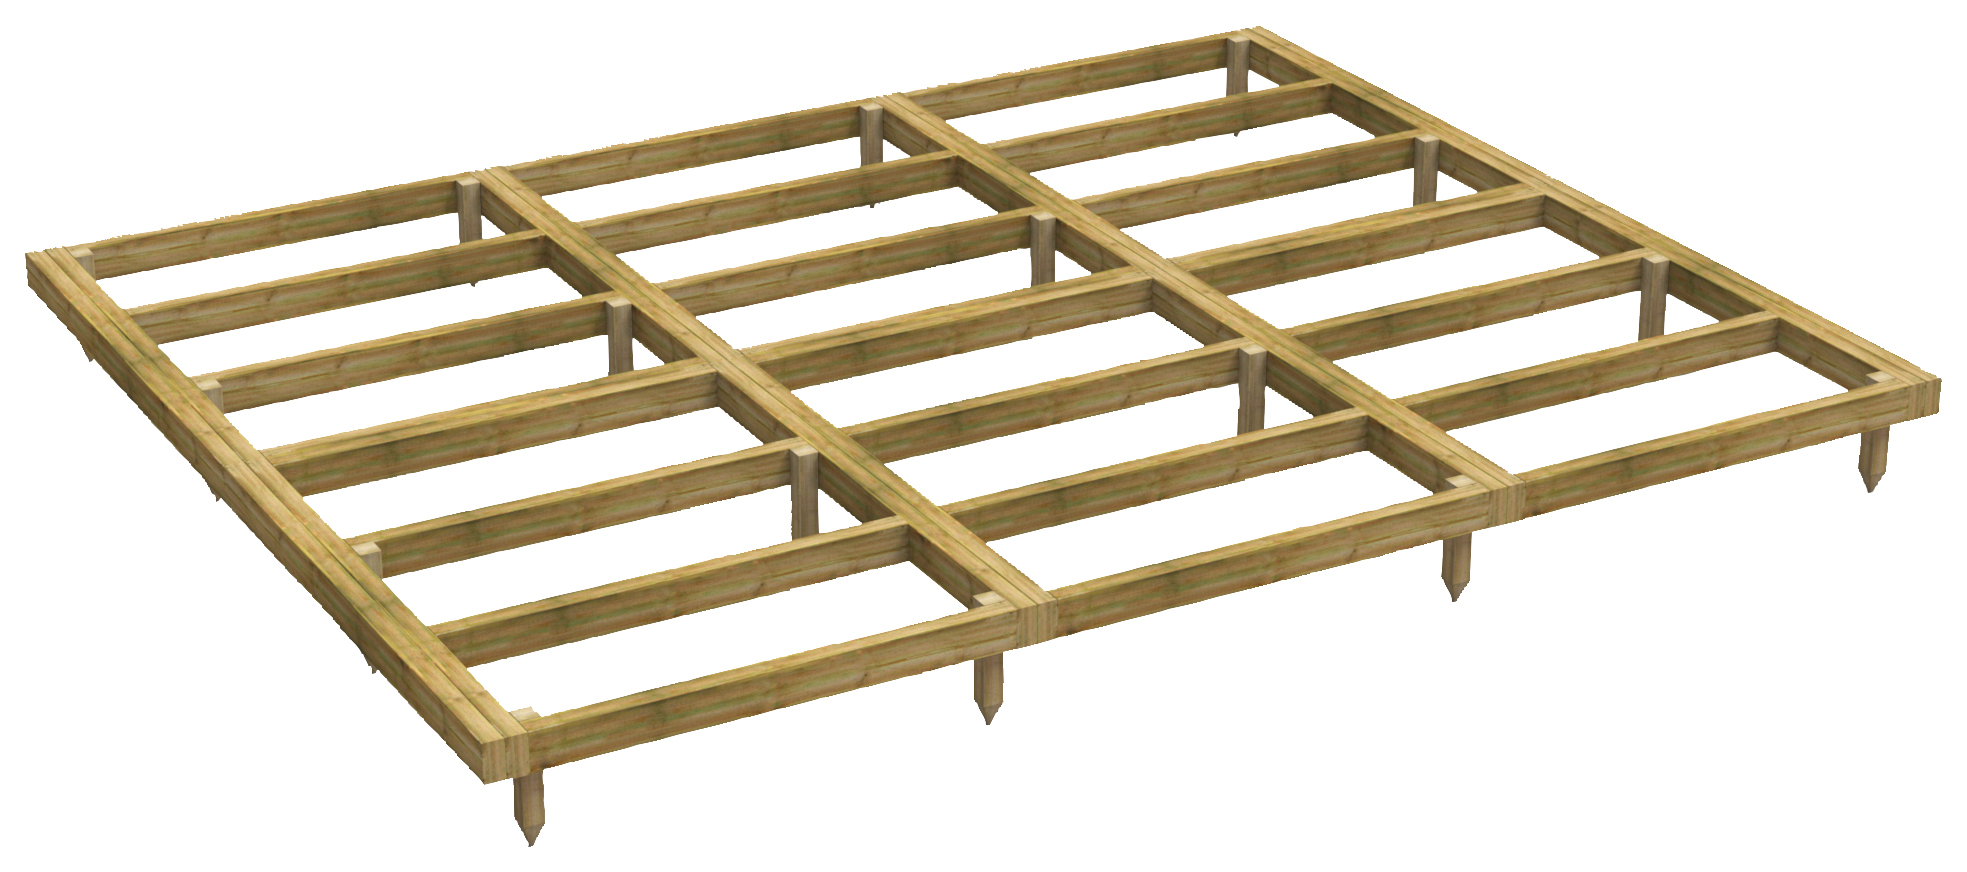 Image of Power Sheds 12 x 10ft Pressure Treated Garden Building Base Kit